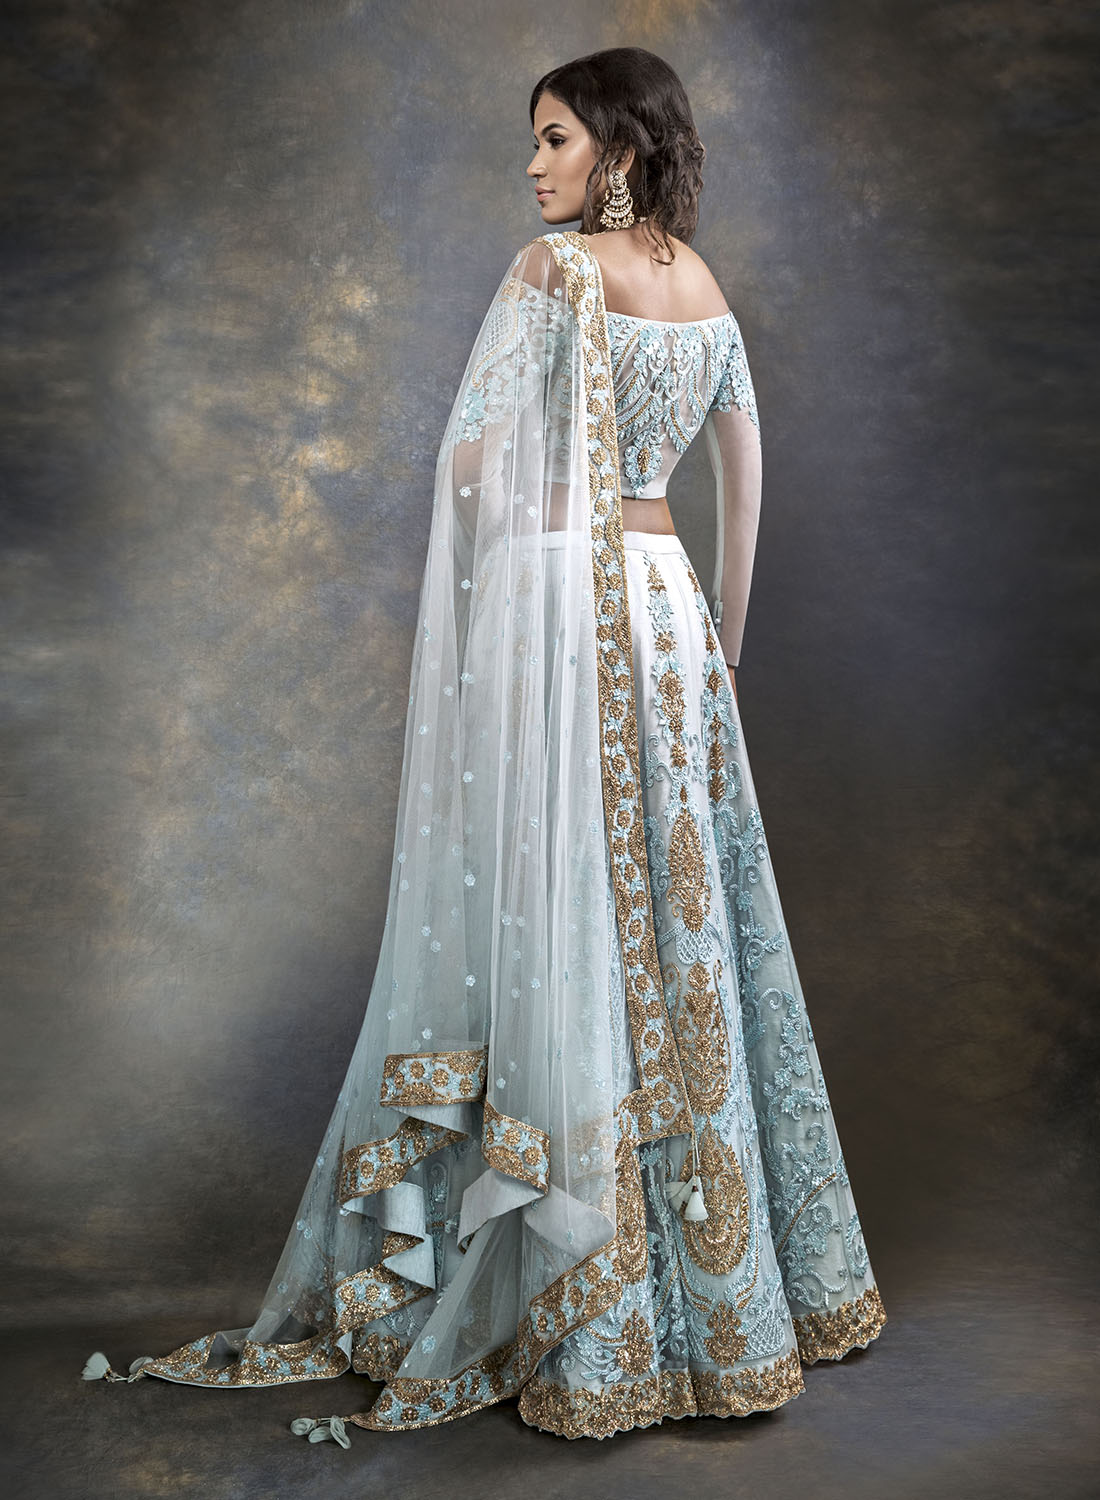 Culture Inspired! 19 beautiful Indian-inspired wedding dresses and sarees |  White indian wedding dress, New wedding dress indian, New wedding dresses